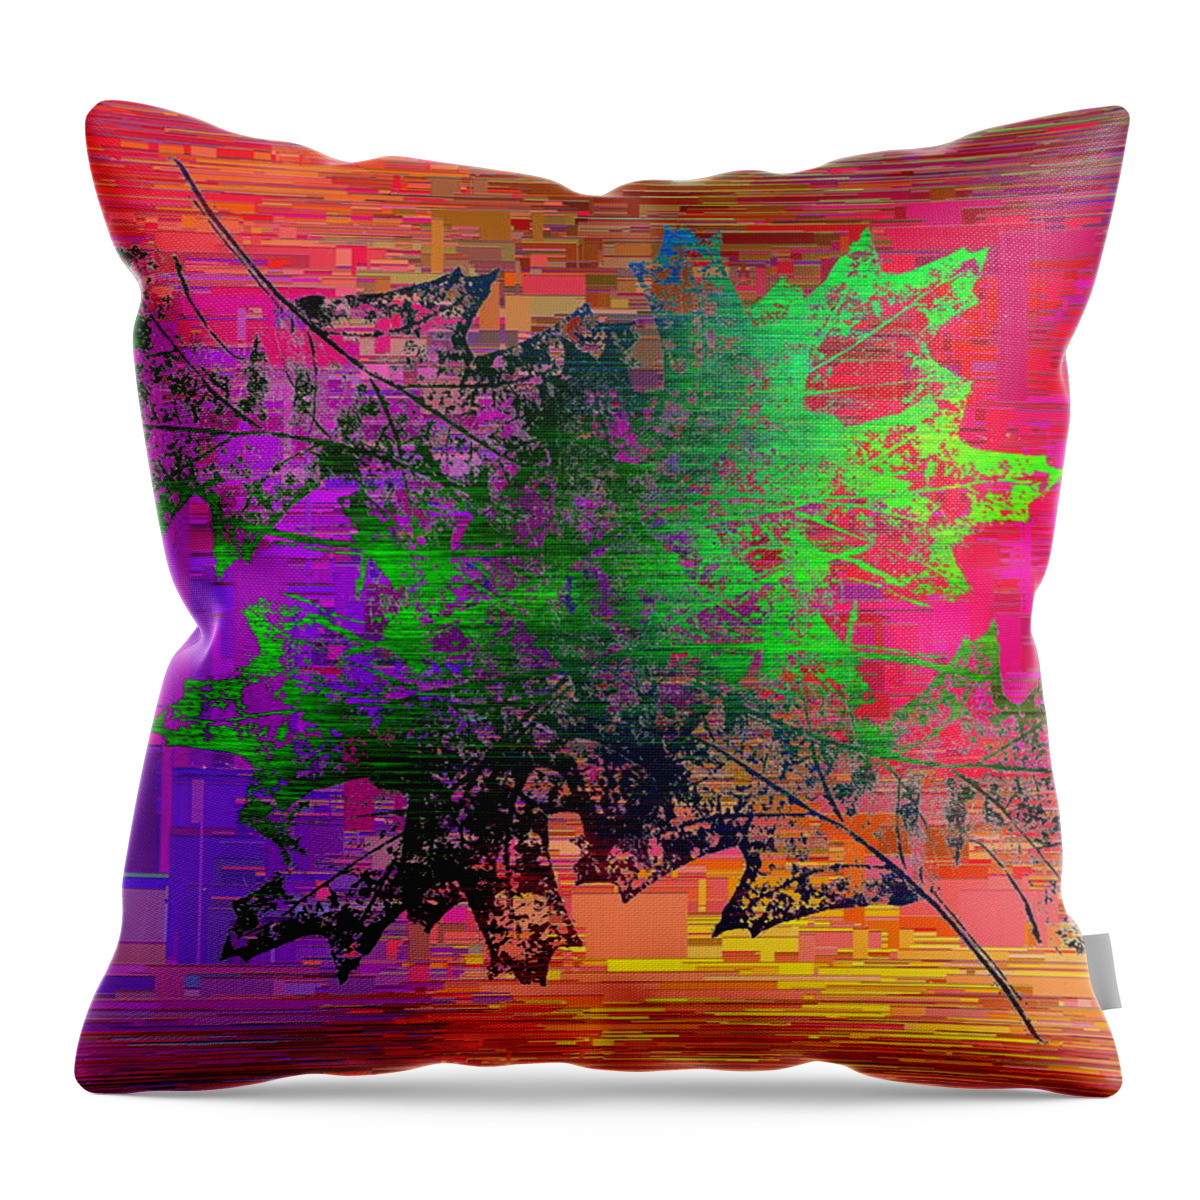 Leaves Throw Pillow featuring the digital art Oak Leaves Cubed by Tim Allen